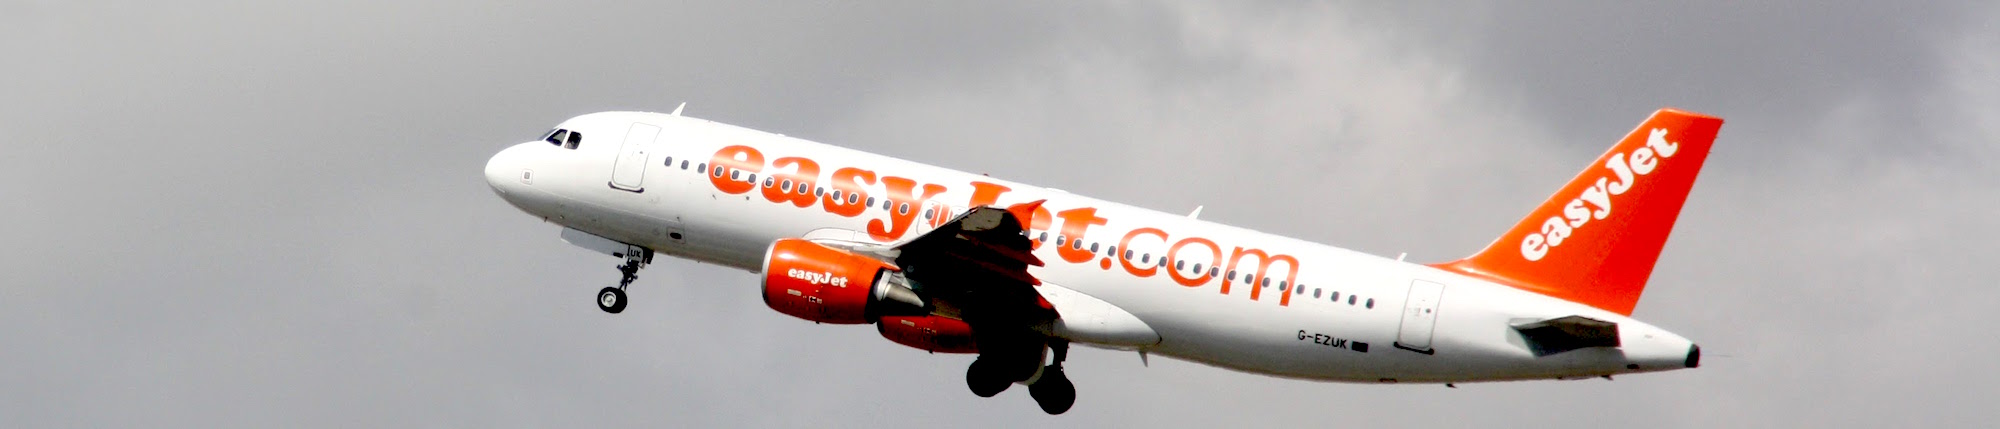 Best time to book flights for Edinburgh (EDI) to Paris (CDG) flights with EasyJet at AirHint